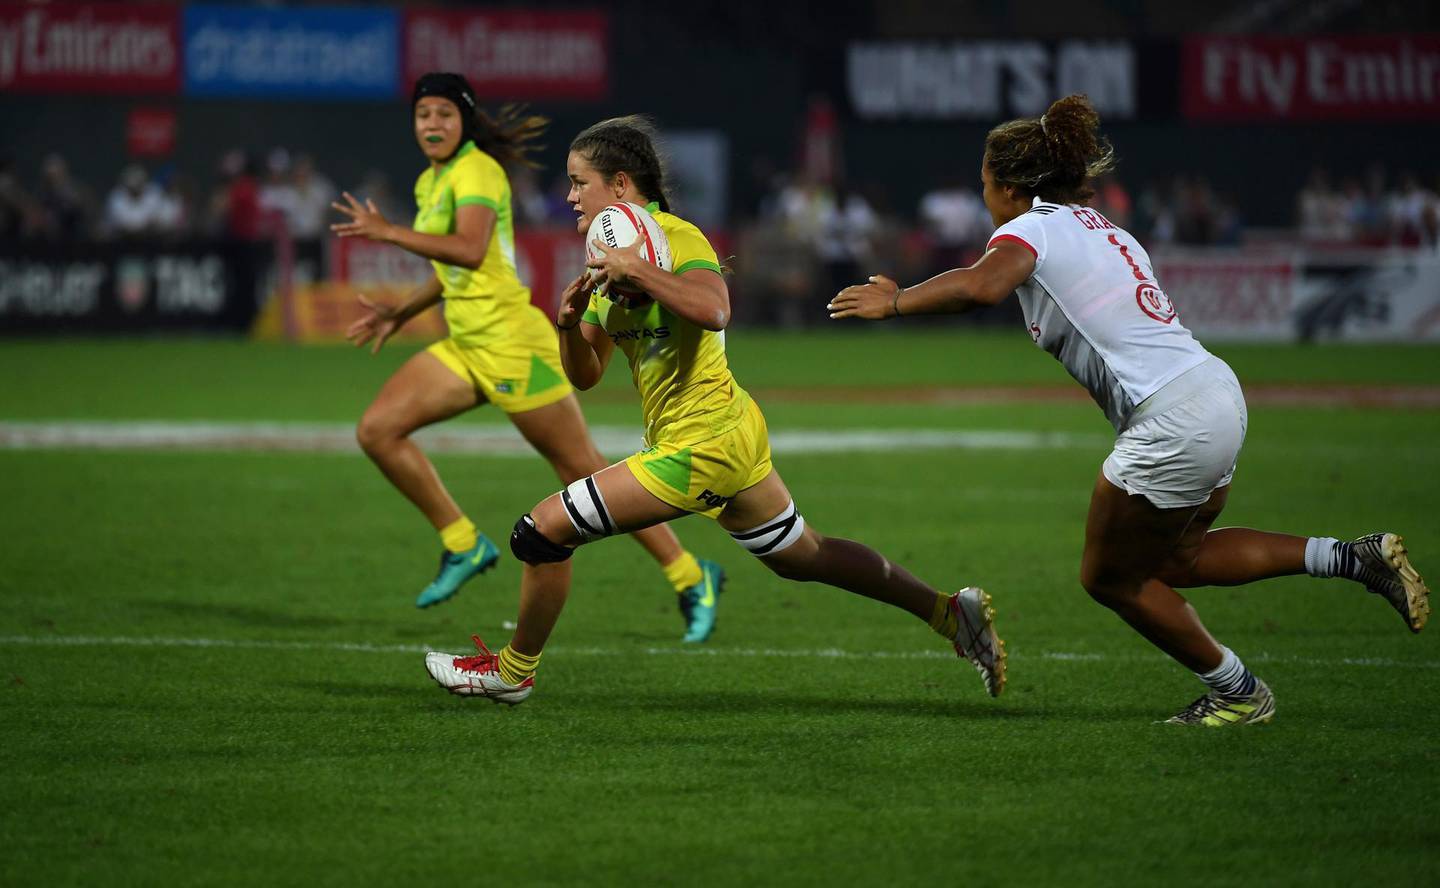 Australia's Dominique Du Toit sprints with the ball to score against the United States in the final of the World Rugby Women's Sevens Series in Dubai, the United Arab Emirates, Friday, Dec. 1, 2017. Australia beat the United States 0-34 victory (AP Photo/Martin Dokoupil)